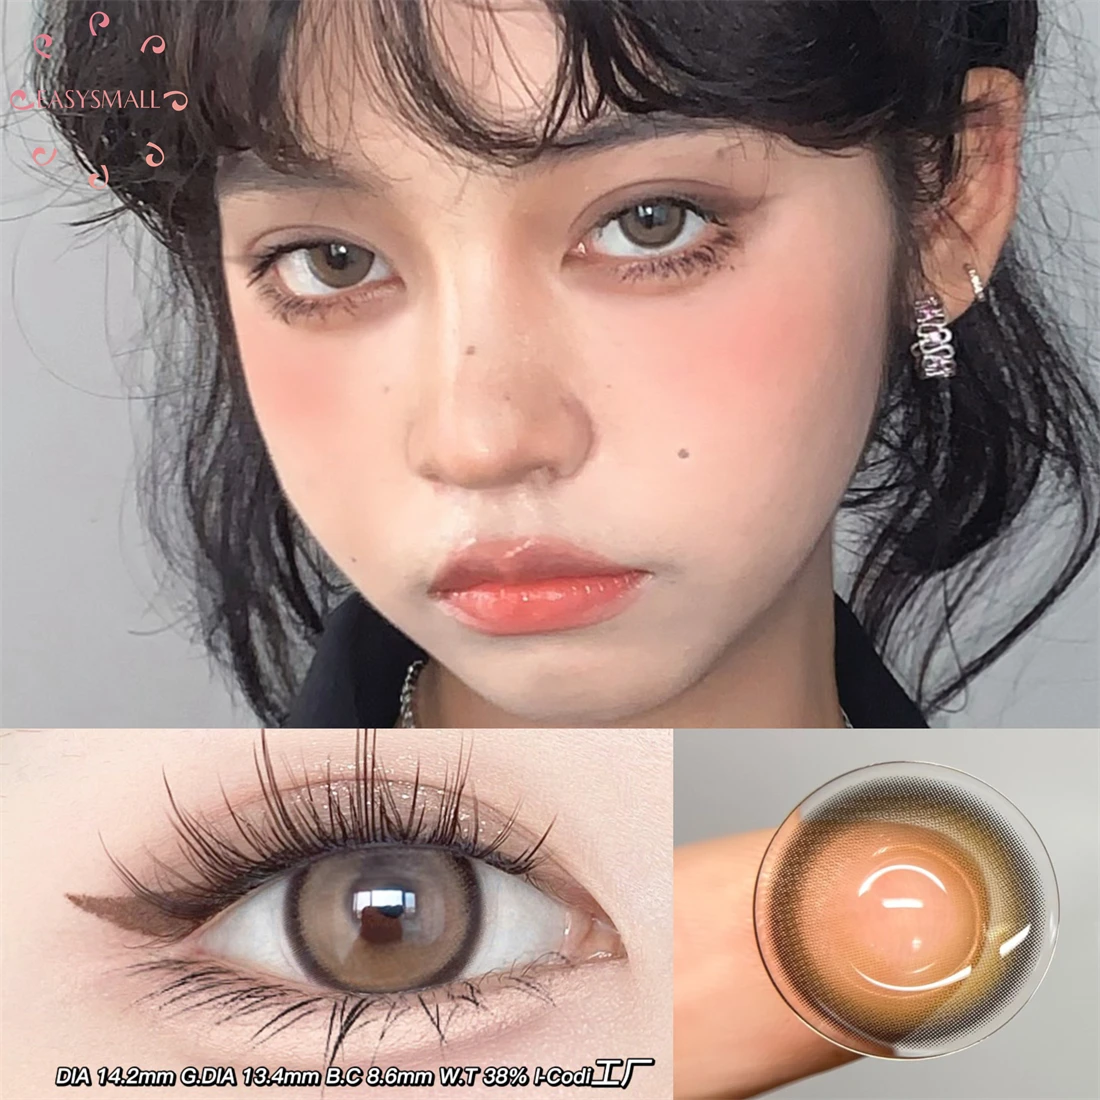 

EASYSMALL Fire Brown Colored Contact Lenses for Eyes Natural Yearly Contact Lens Big Beauty Pupil Degrees Prescription Myopia